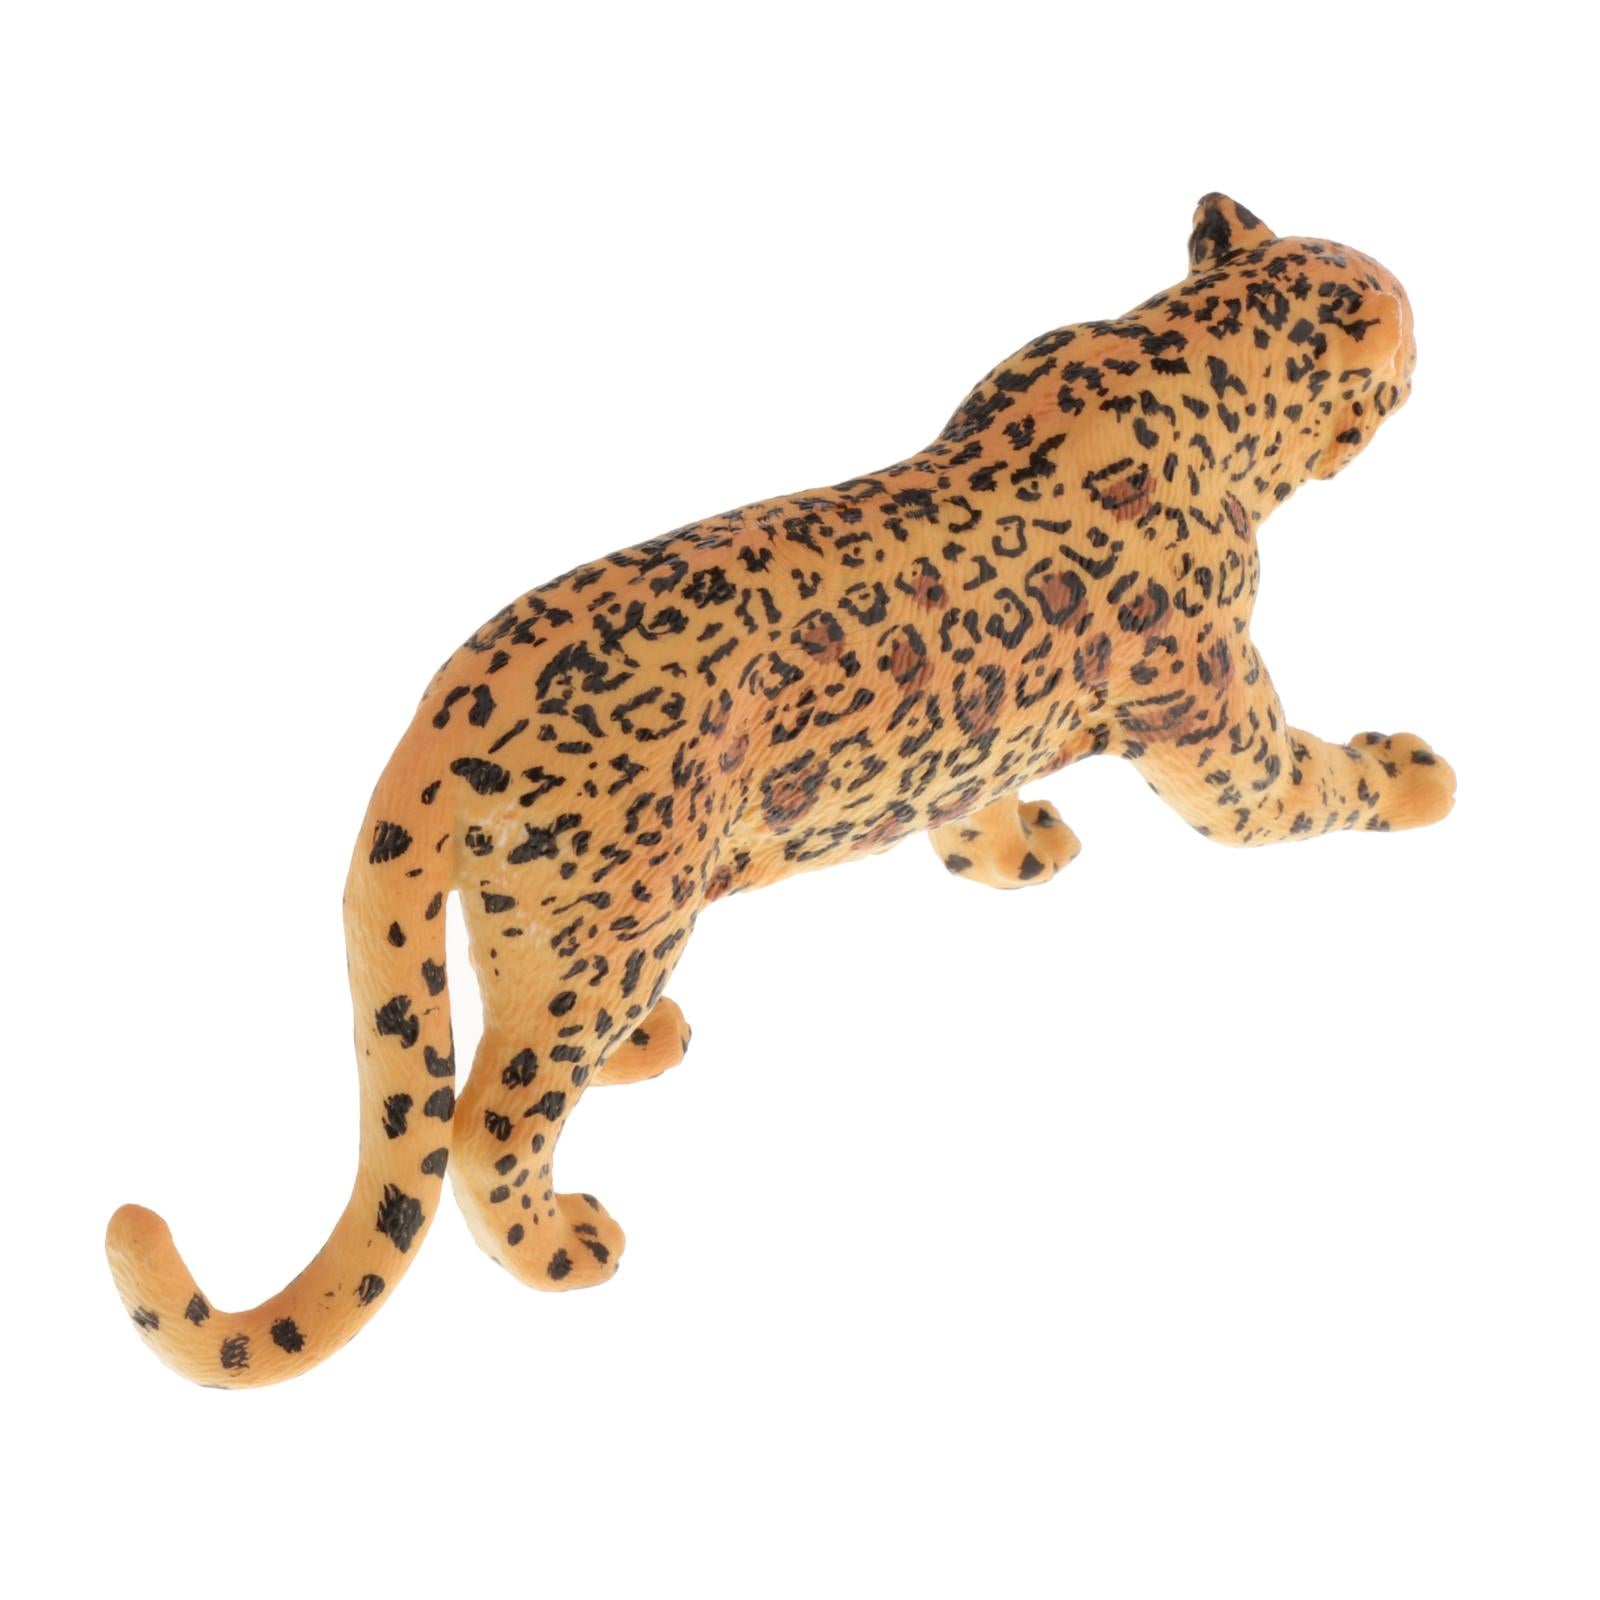 Simulation Animal Figures Model Kids Educational Toys Gifts  Leopard